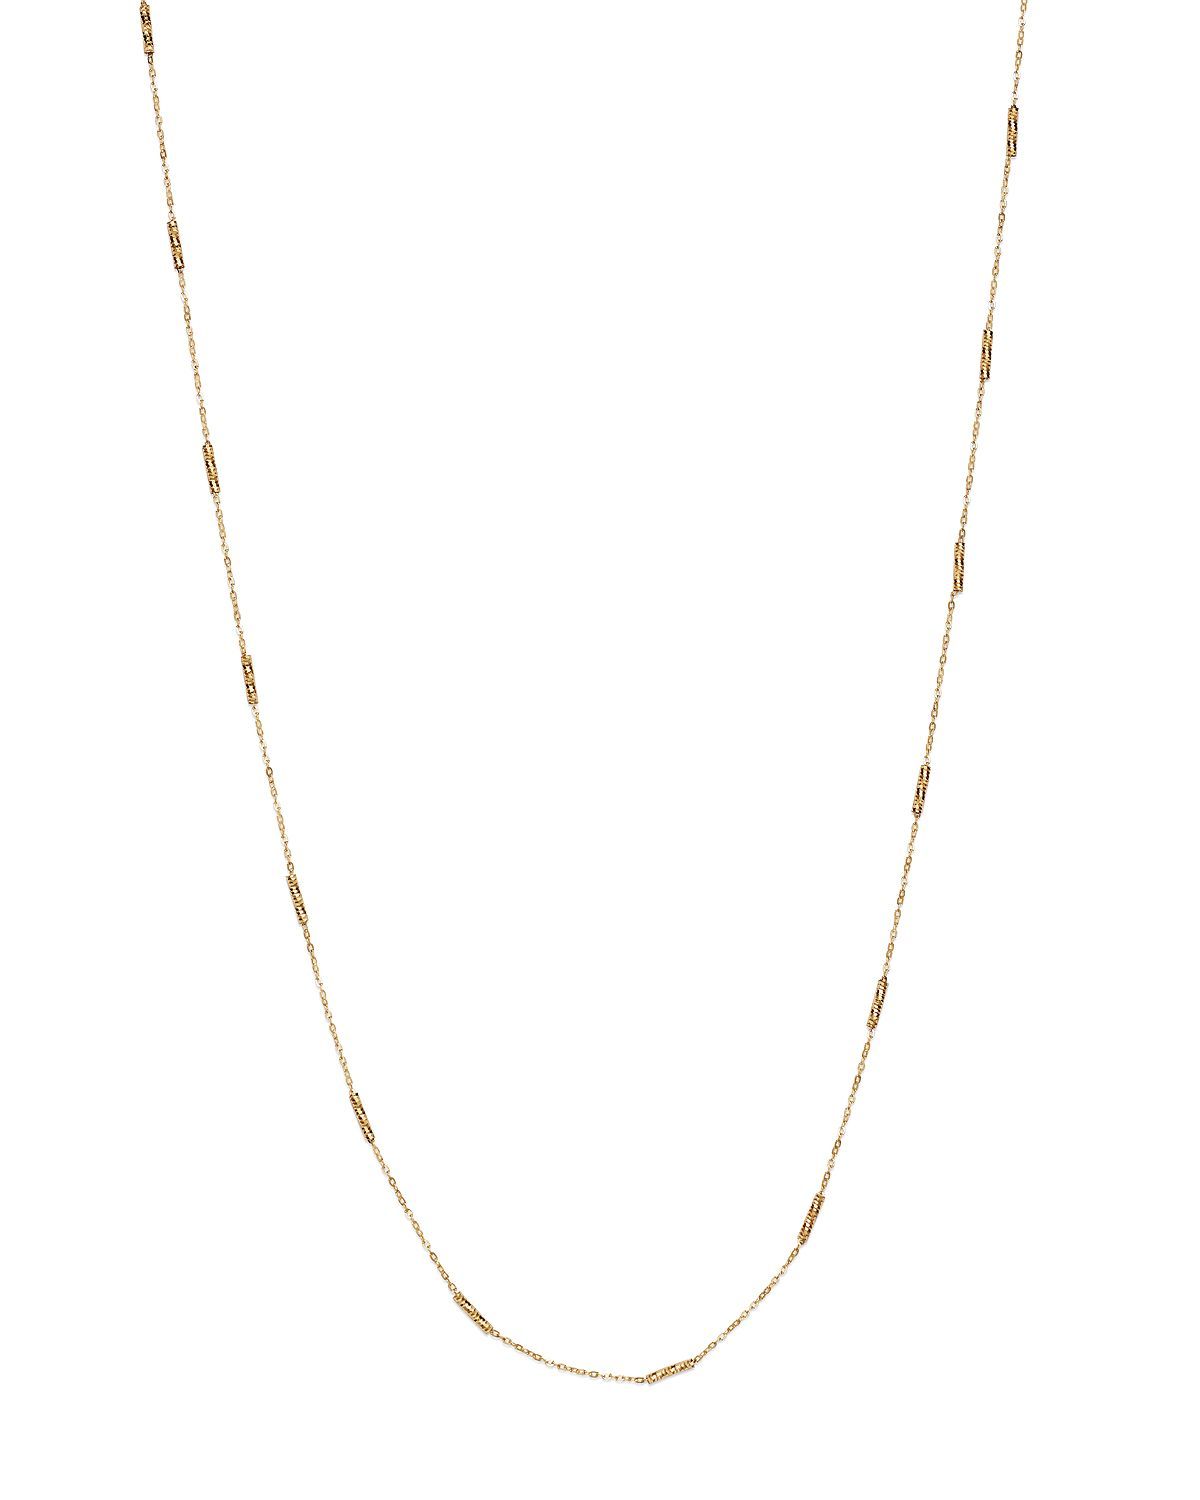 Bar Station Necklace in 14K Yellow Gold, 16" - 100% Exclusive | Bloomingdale's (US)